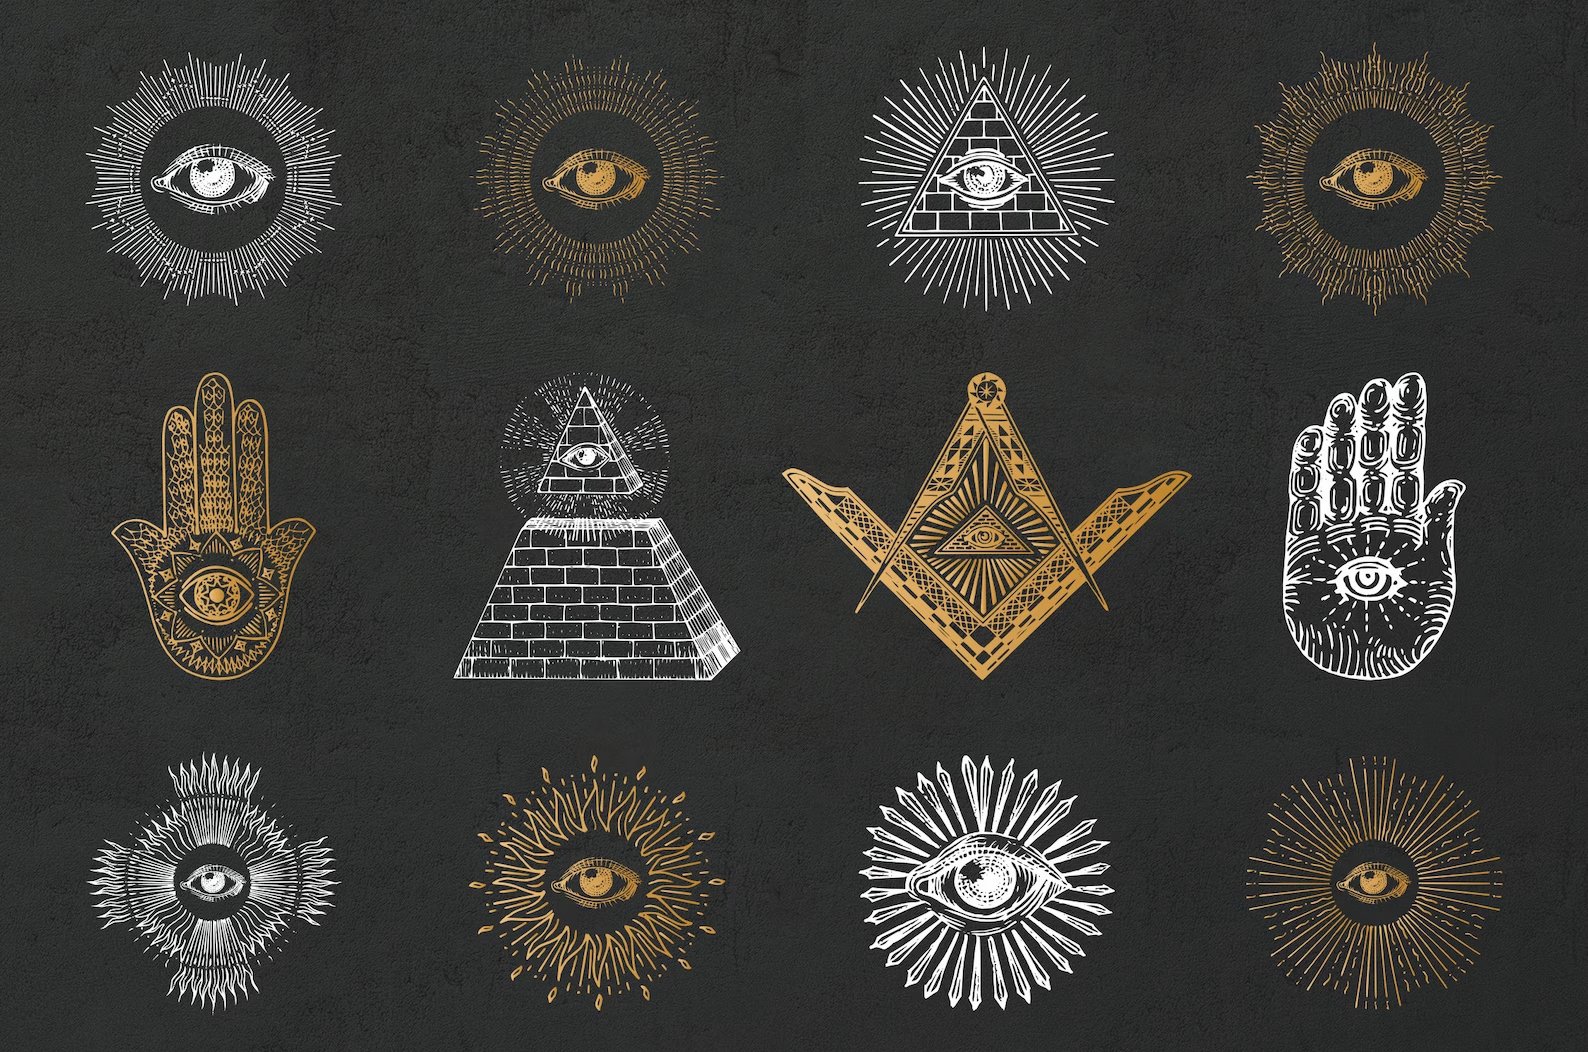 The image is a collection of 12 illustrations of eyes, hands, and pyramids in a grid layout. The illustrations are in a white line art style on a black background. The illustrations are of different sizes, orientations, and styles, some are more detailed and some are more abstract. The illustrations are all related to the theme of eyes, hands, and pyramids, which are symbols of vision, creation, and mystery. Some illustrations combine these elements, such as an eye in a pyramid or a hand holding an eye. Some illustrations have a sunburst or radiating lines around them, which are symbols of light and energy. The image is a creative way of exploring the meanings and associations of these symbols.